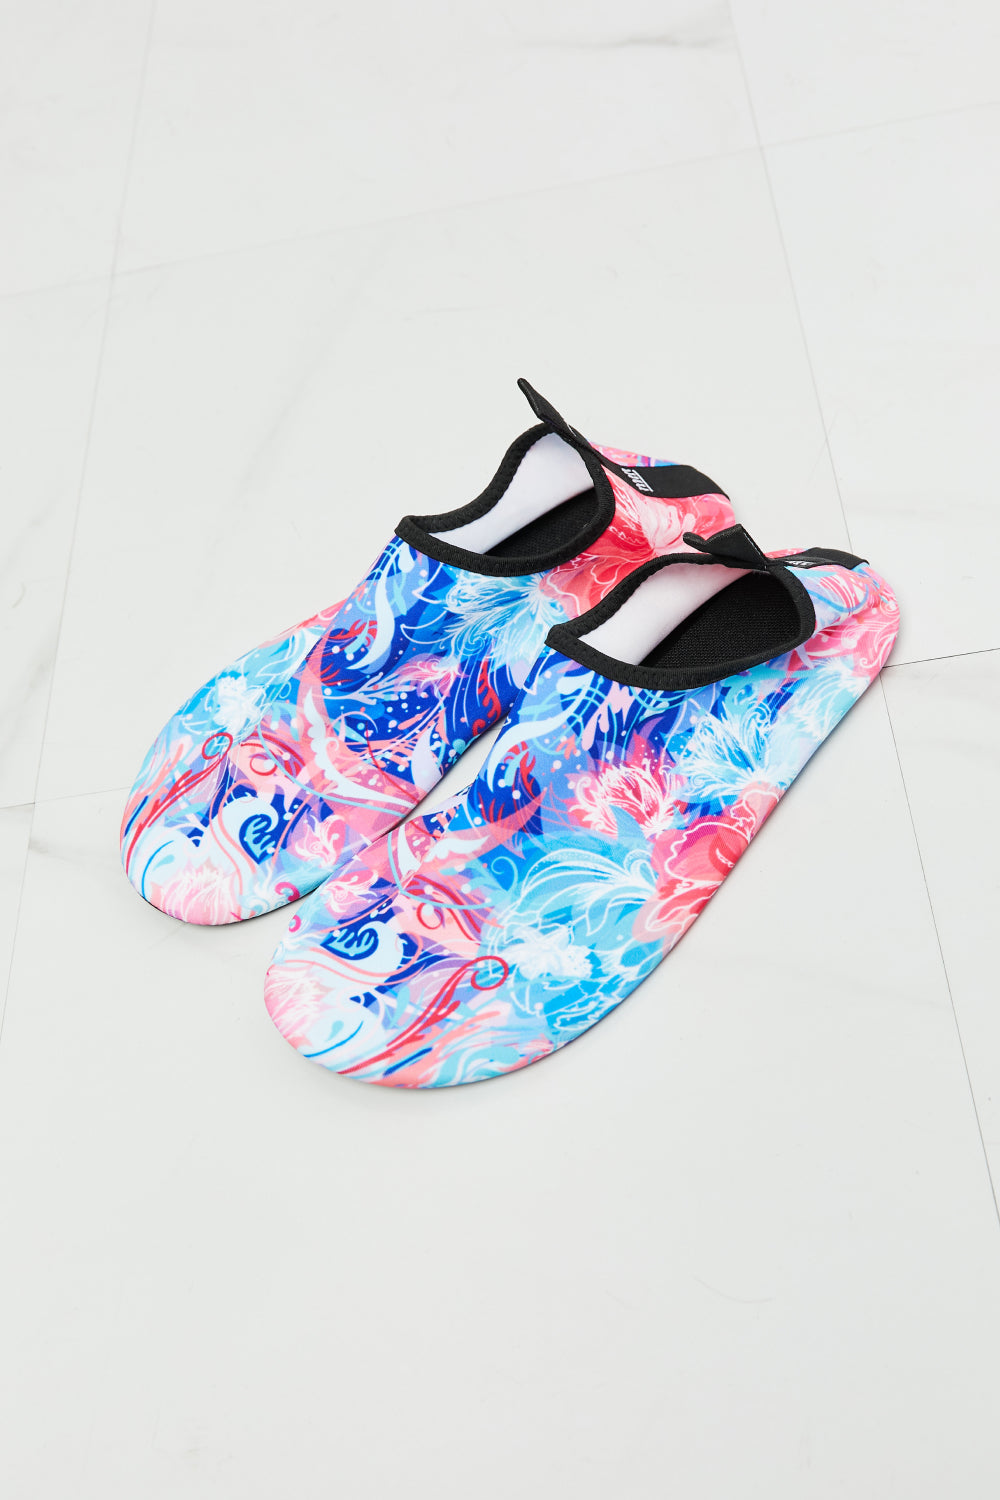 MMshoes On The Shore Water Shoes in Pink and Sky Blue Print on any thing USA/STOD clothes